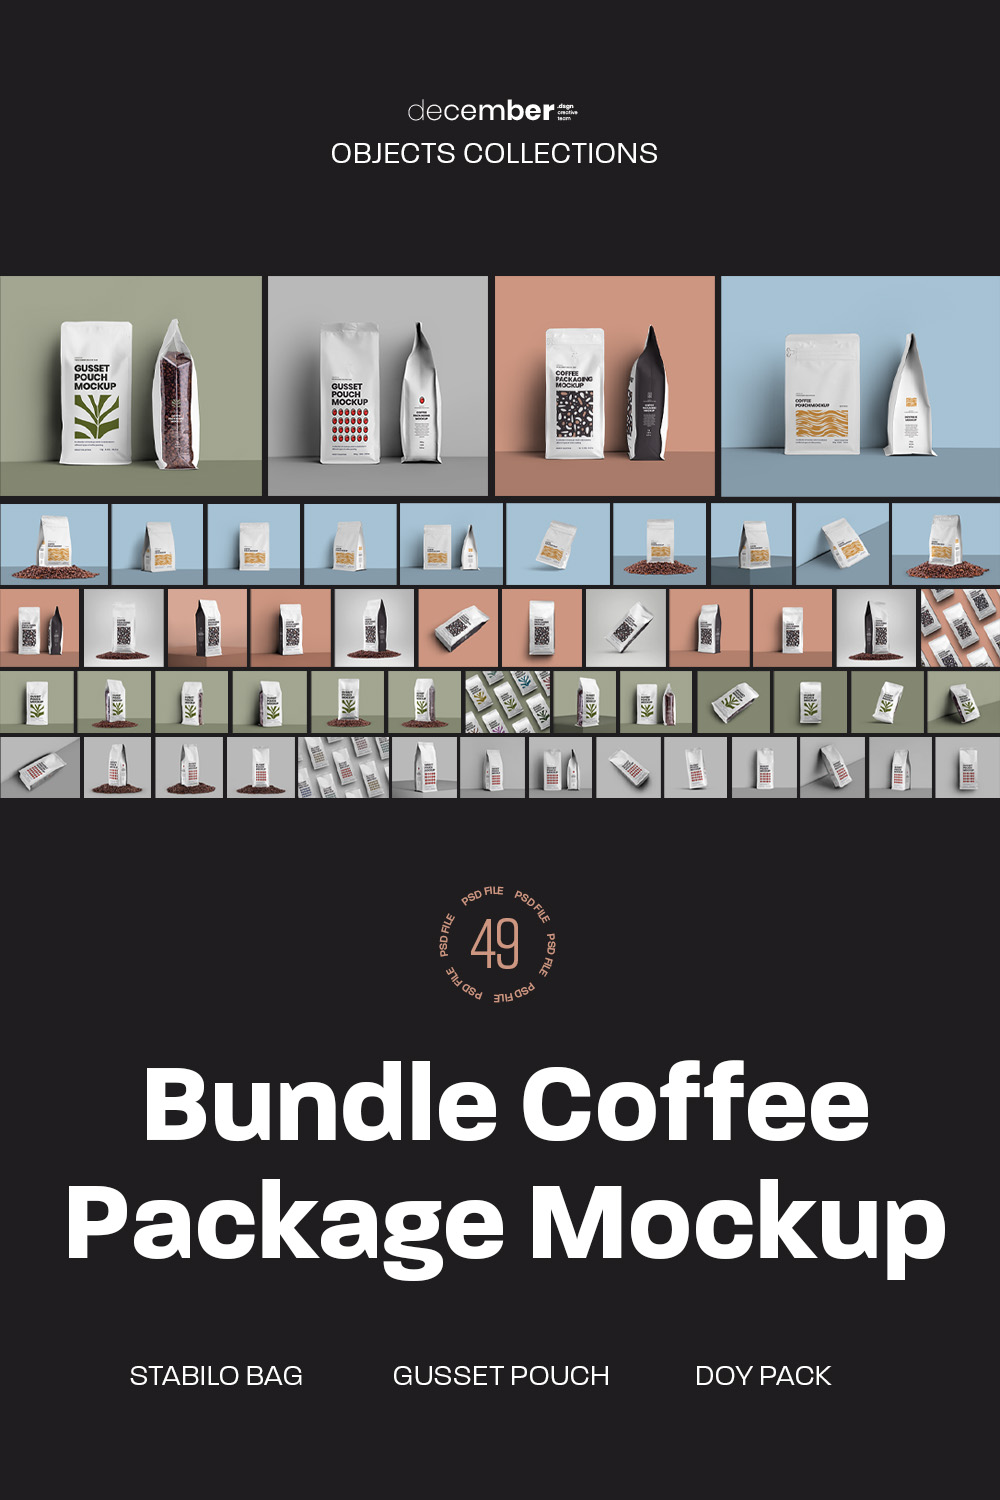 Coffee Pouch Bag Mockup pinterest image.